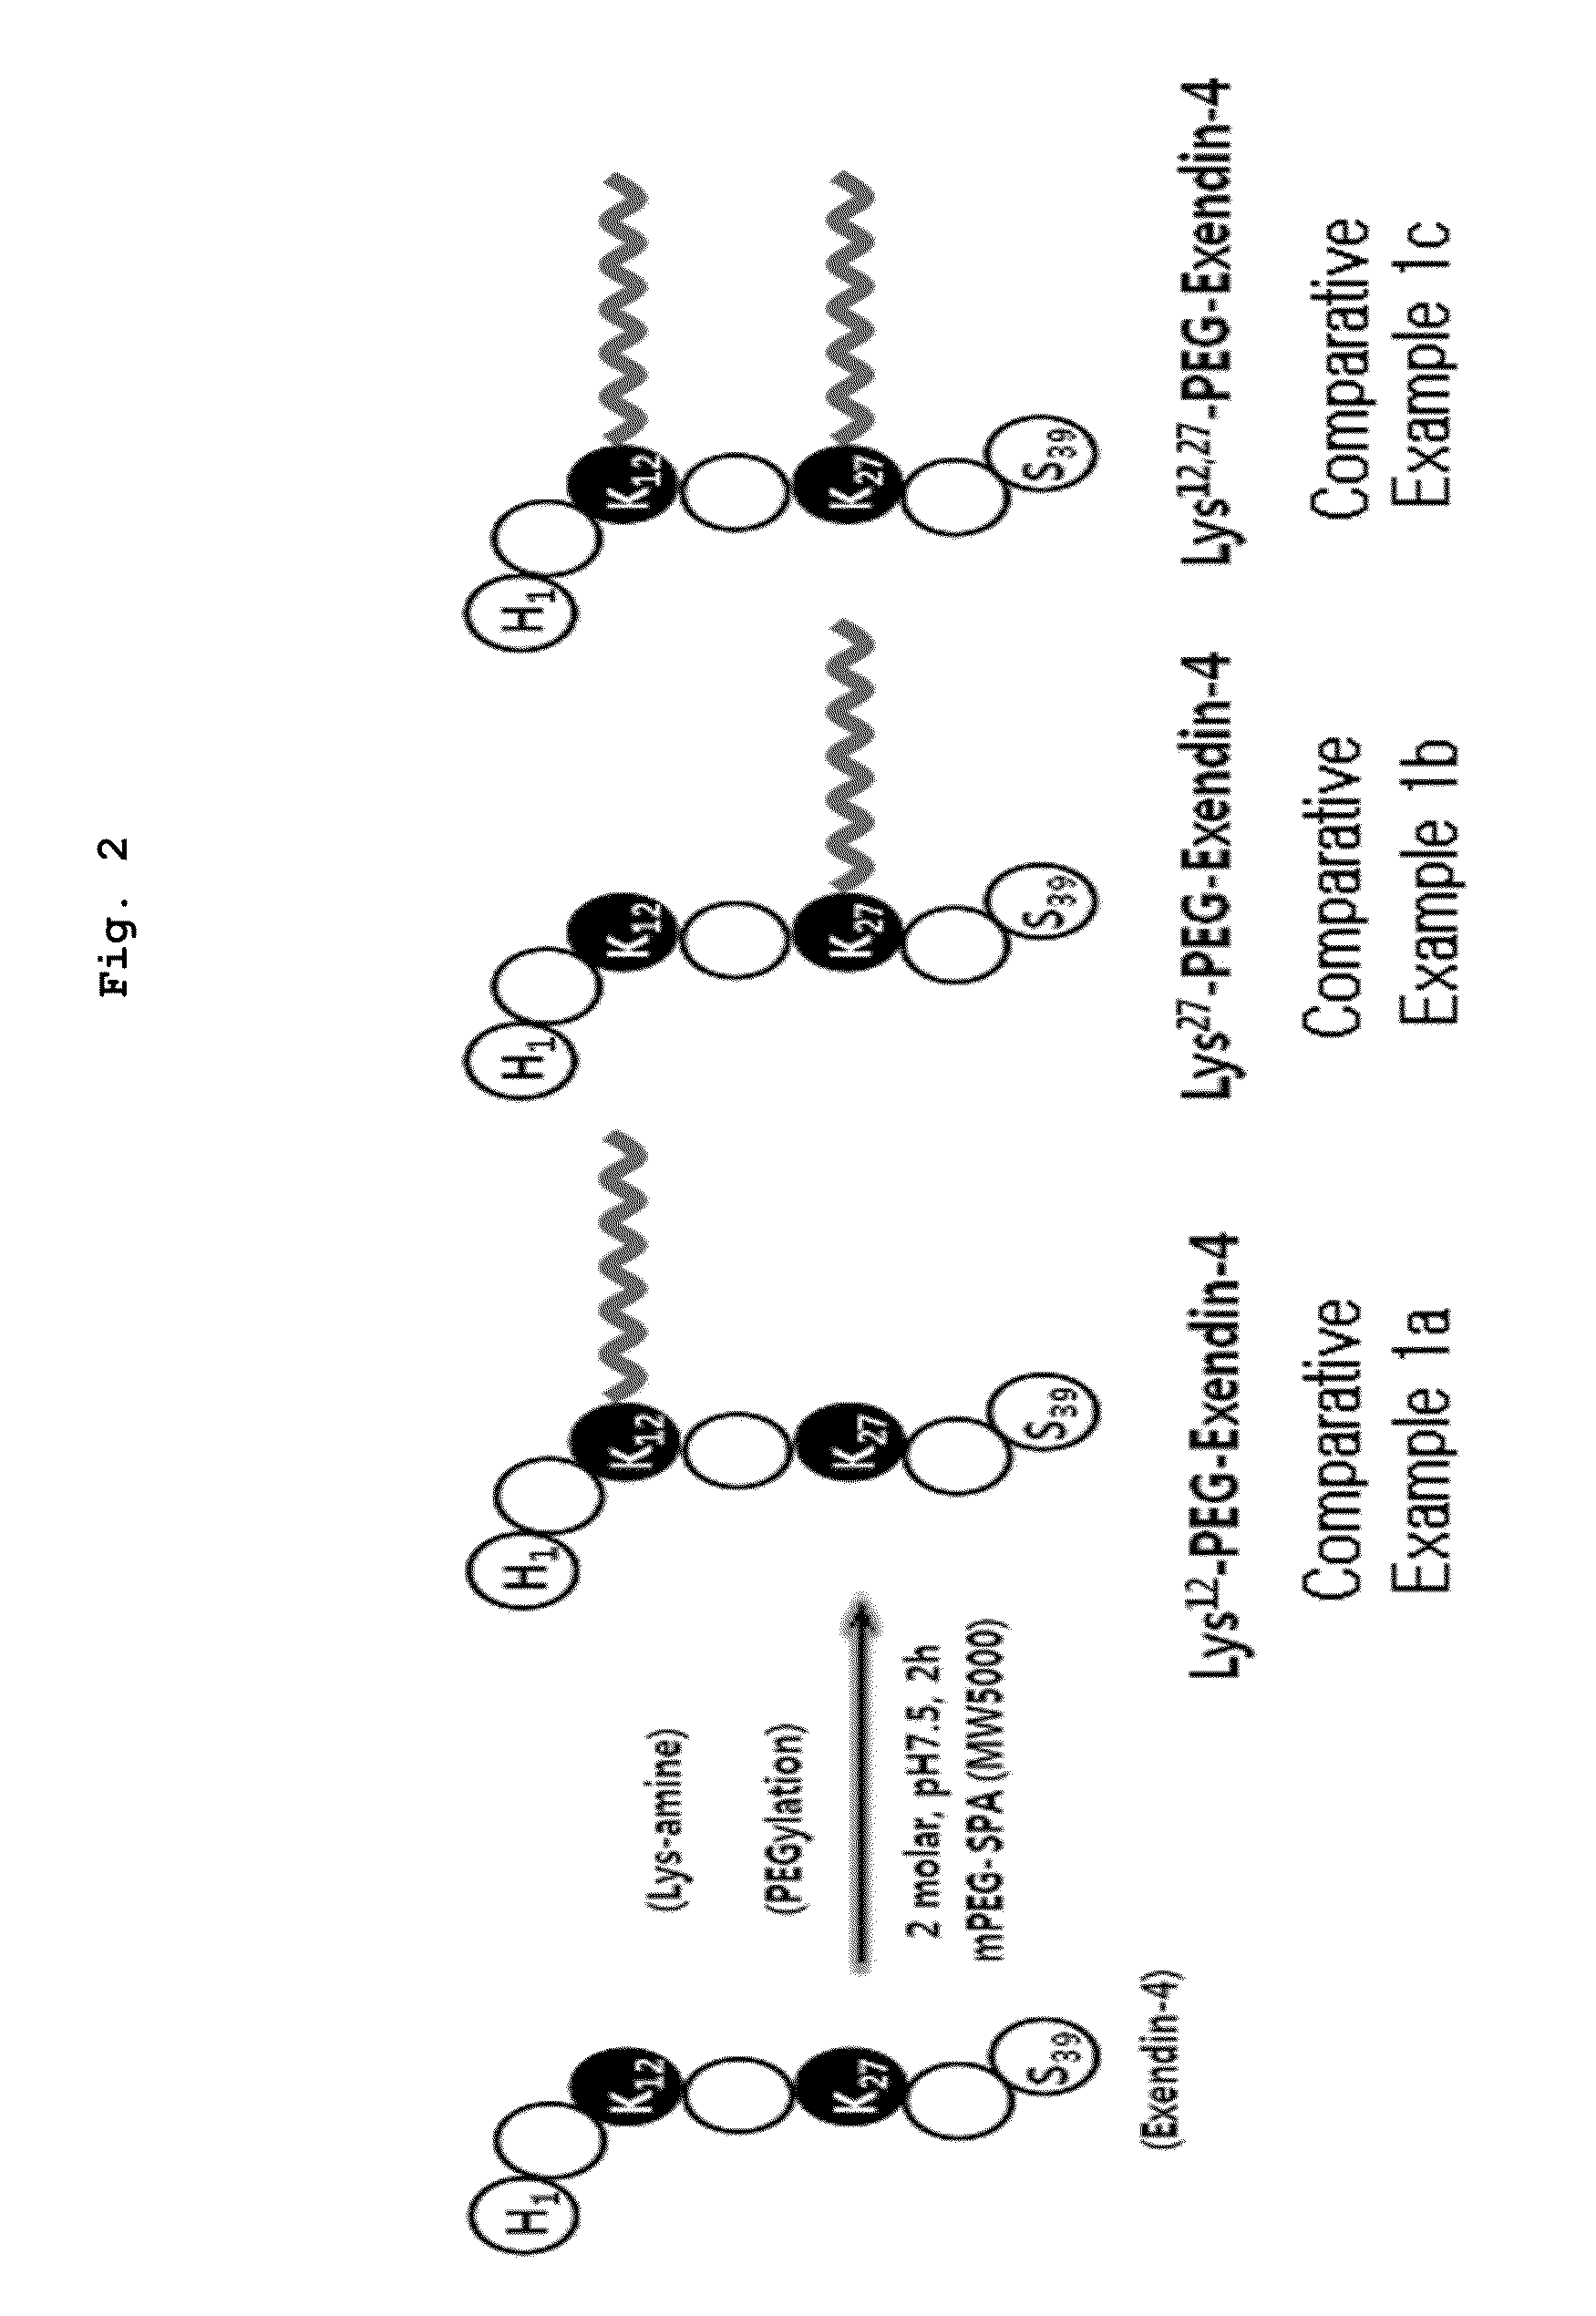 Exendin-4 analogue pegylated with polyethylene glycol or derivative thereof, preparation method thereof, and pharmaceutical compostion for preventing or treating diabetes, containing same as active ingredient